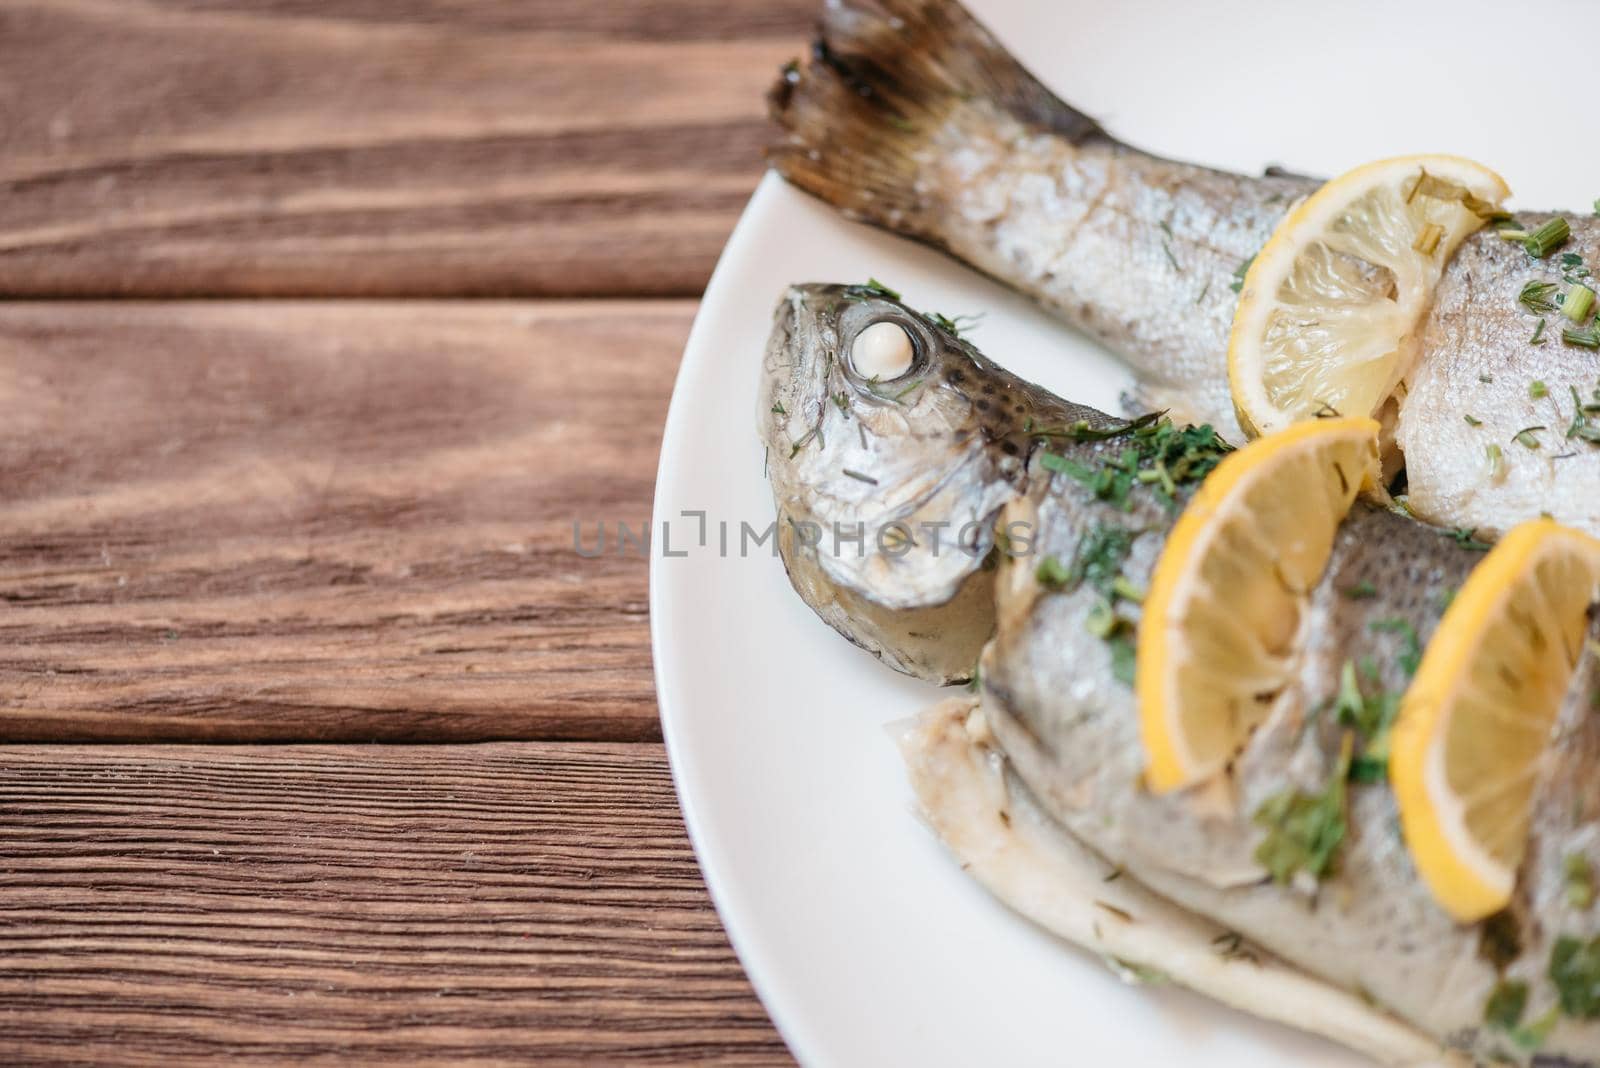 Simple fish dish with lemons and greenery on a white plate on wooden table. Copy-space in left part of image.